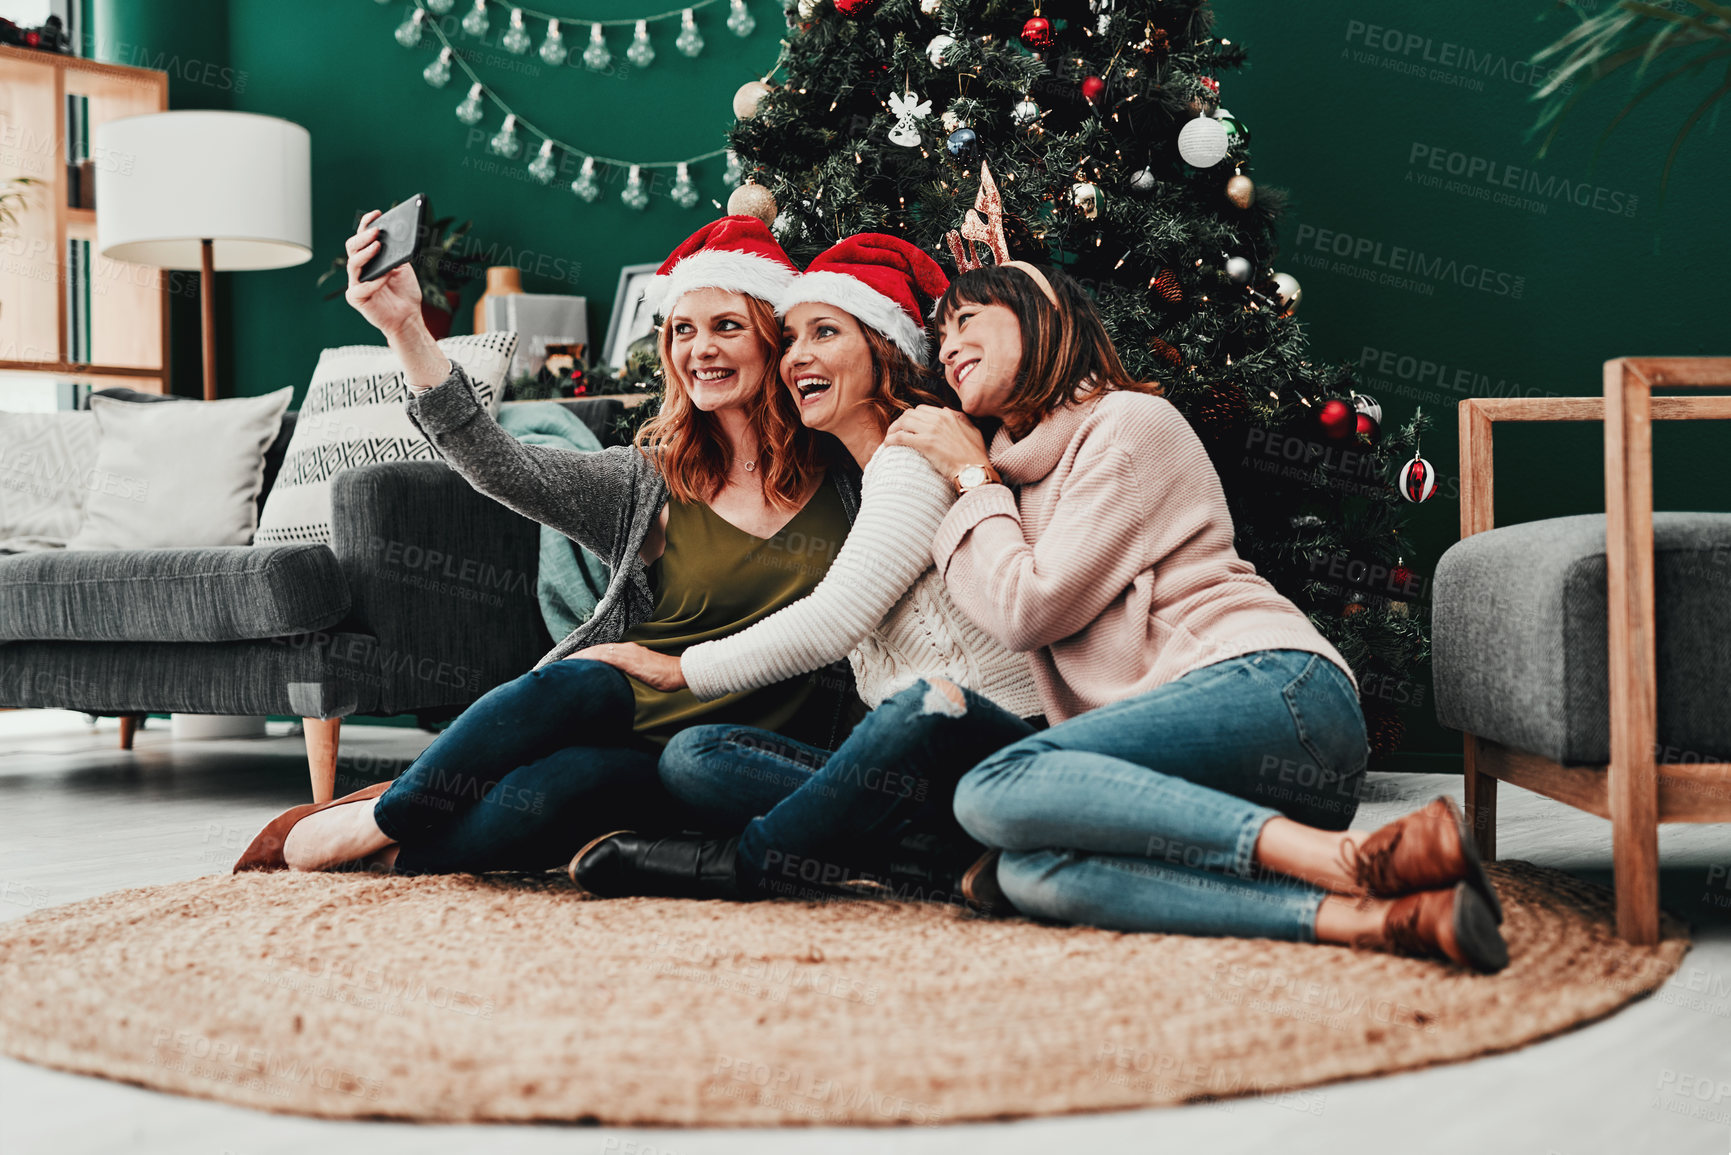 Buy stock photo Shot of three attractive middle aged women taking self portraits together with a cellphone at home during Christmas time